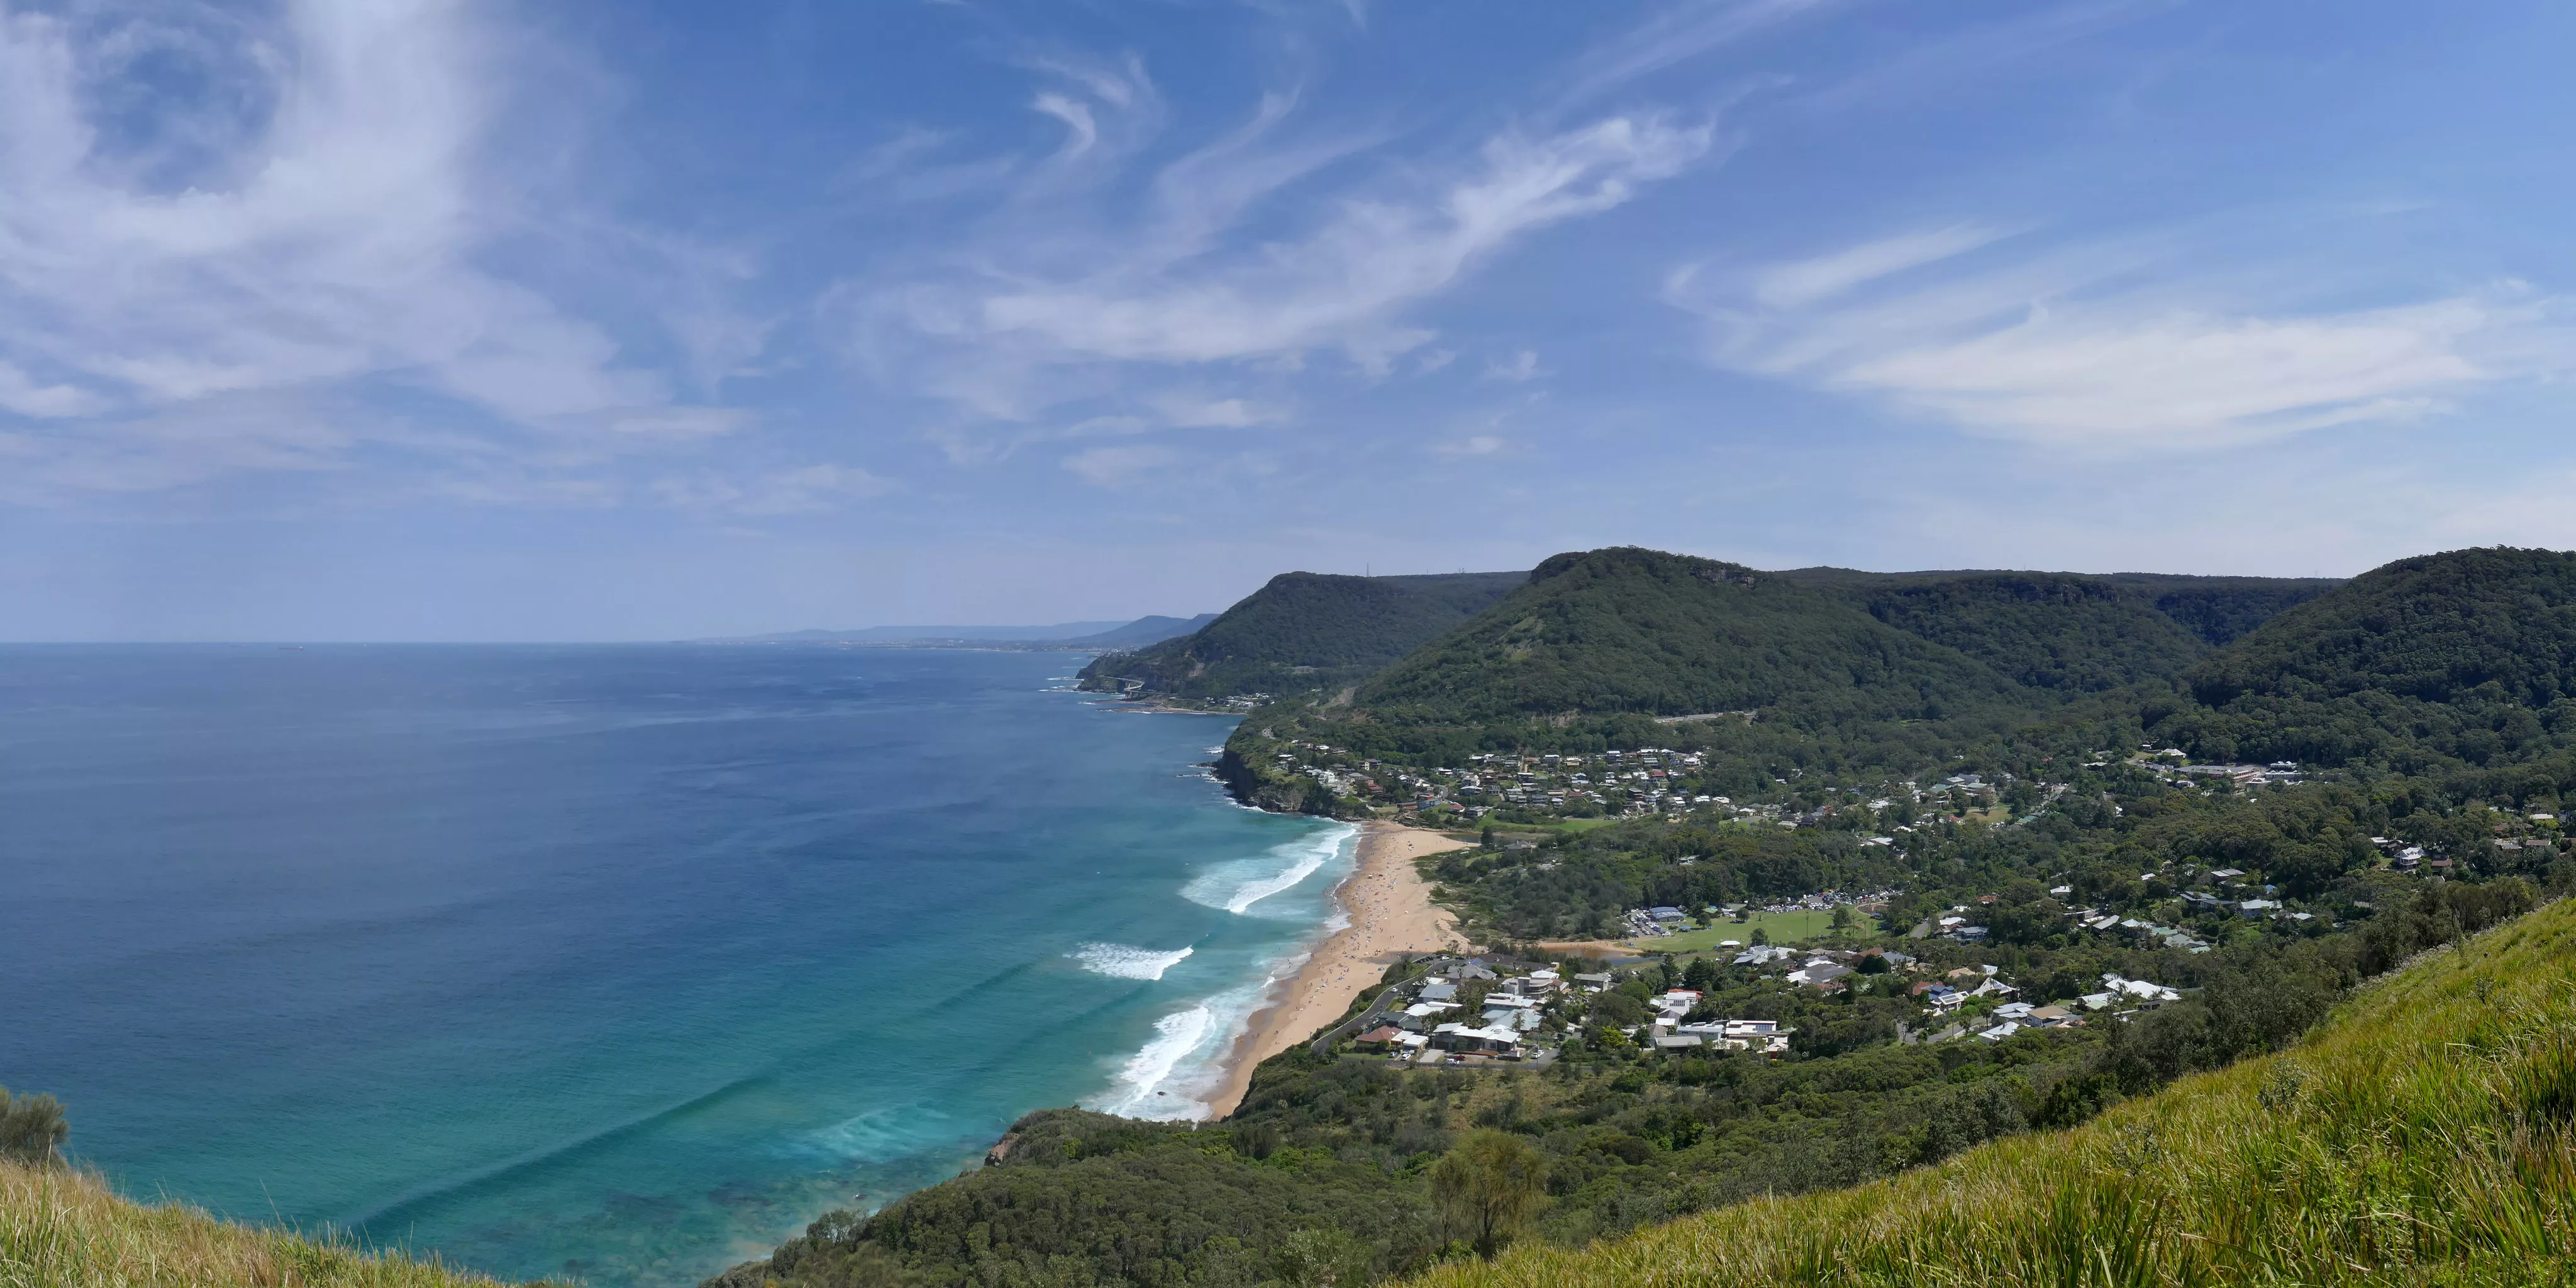 Bald Hill Lookout & Hang Gliding Spot in Australia, Australia and Oceania | Observation Decks,Hang Gliding - Rated 4.6